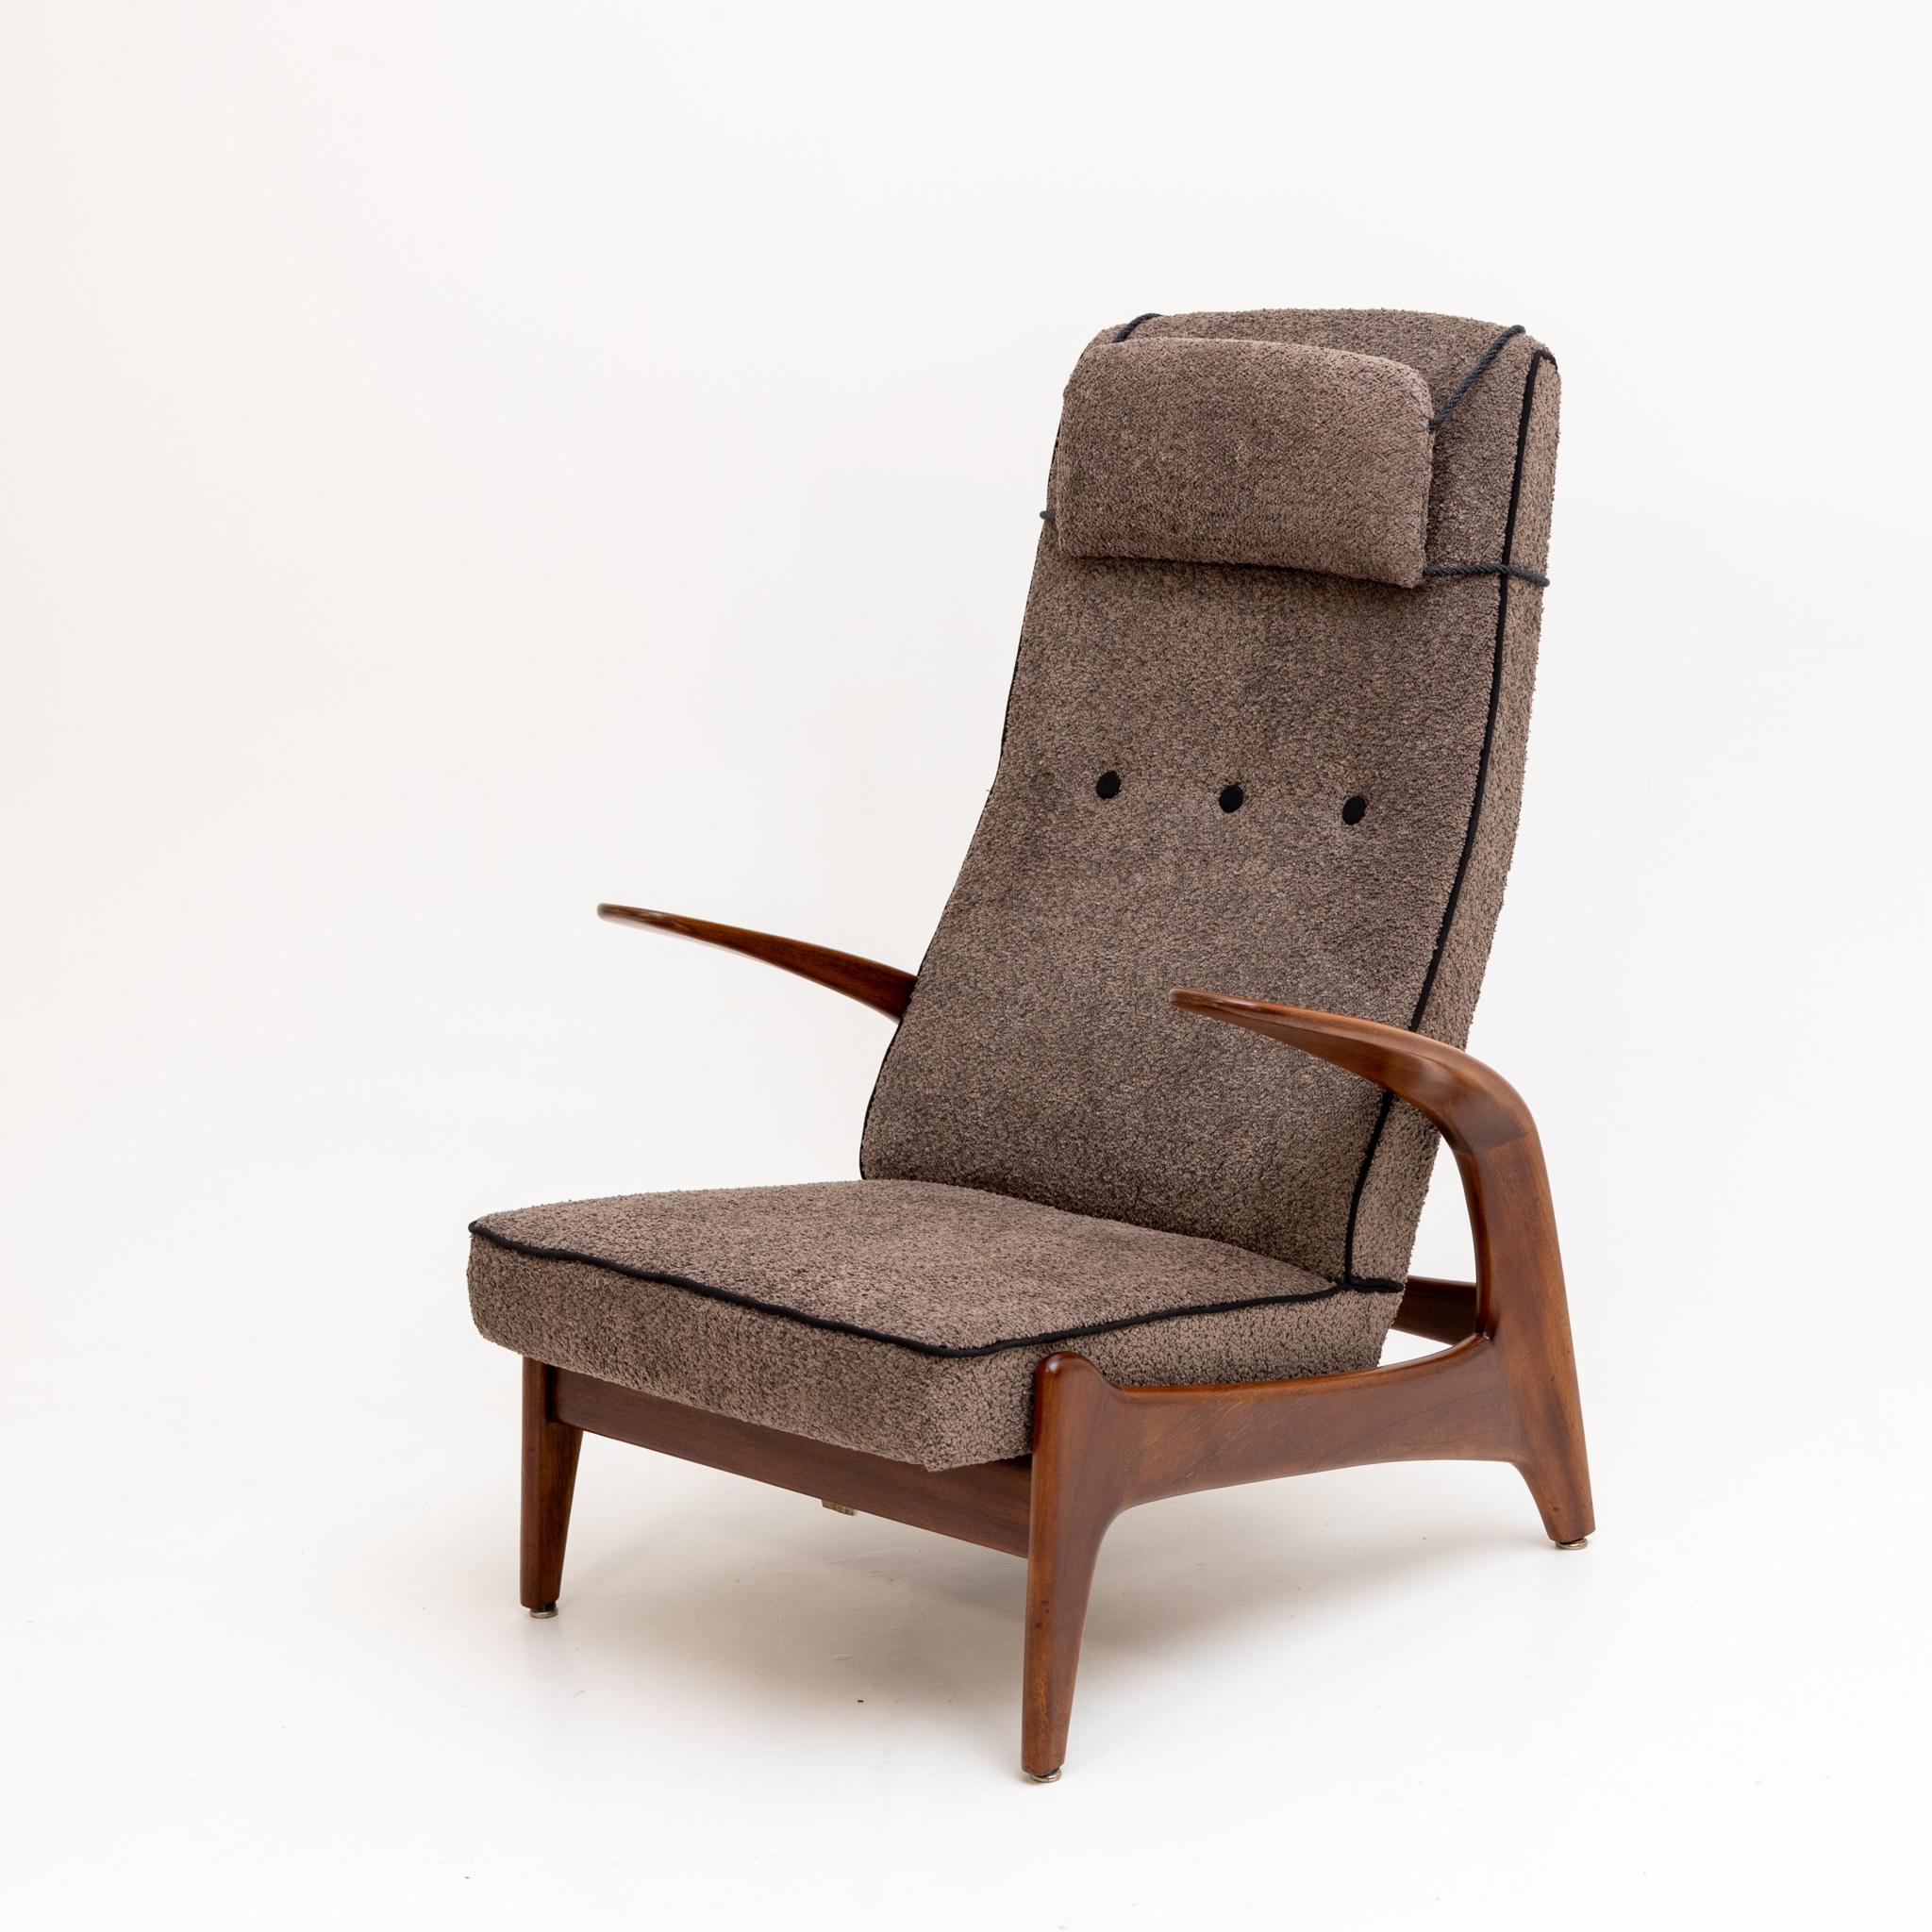 20th Century Armchair and Stool Rock'n Rest by Rolf Rastad & Adolf Relling